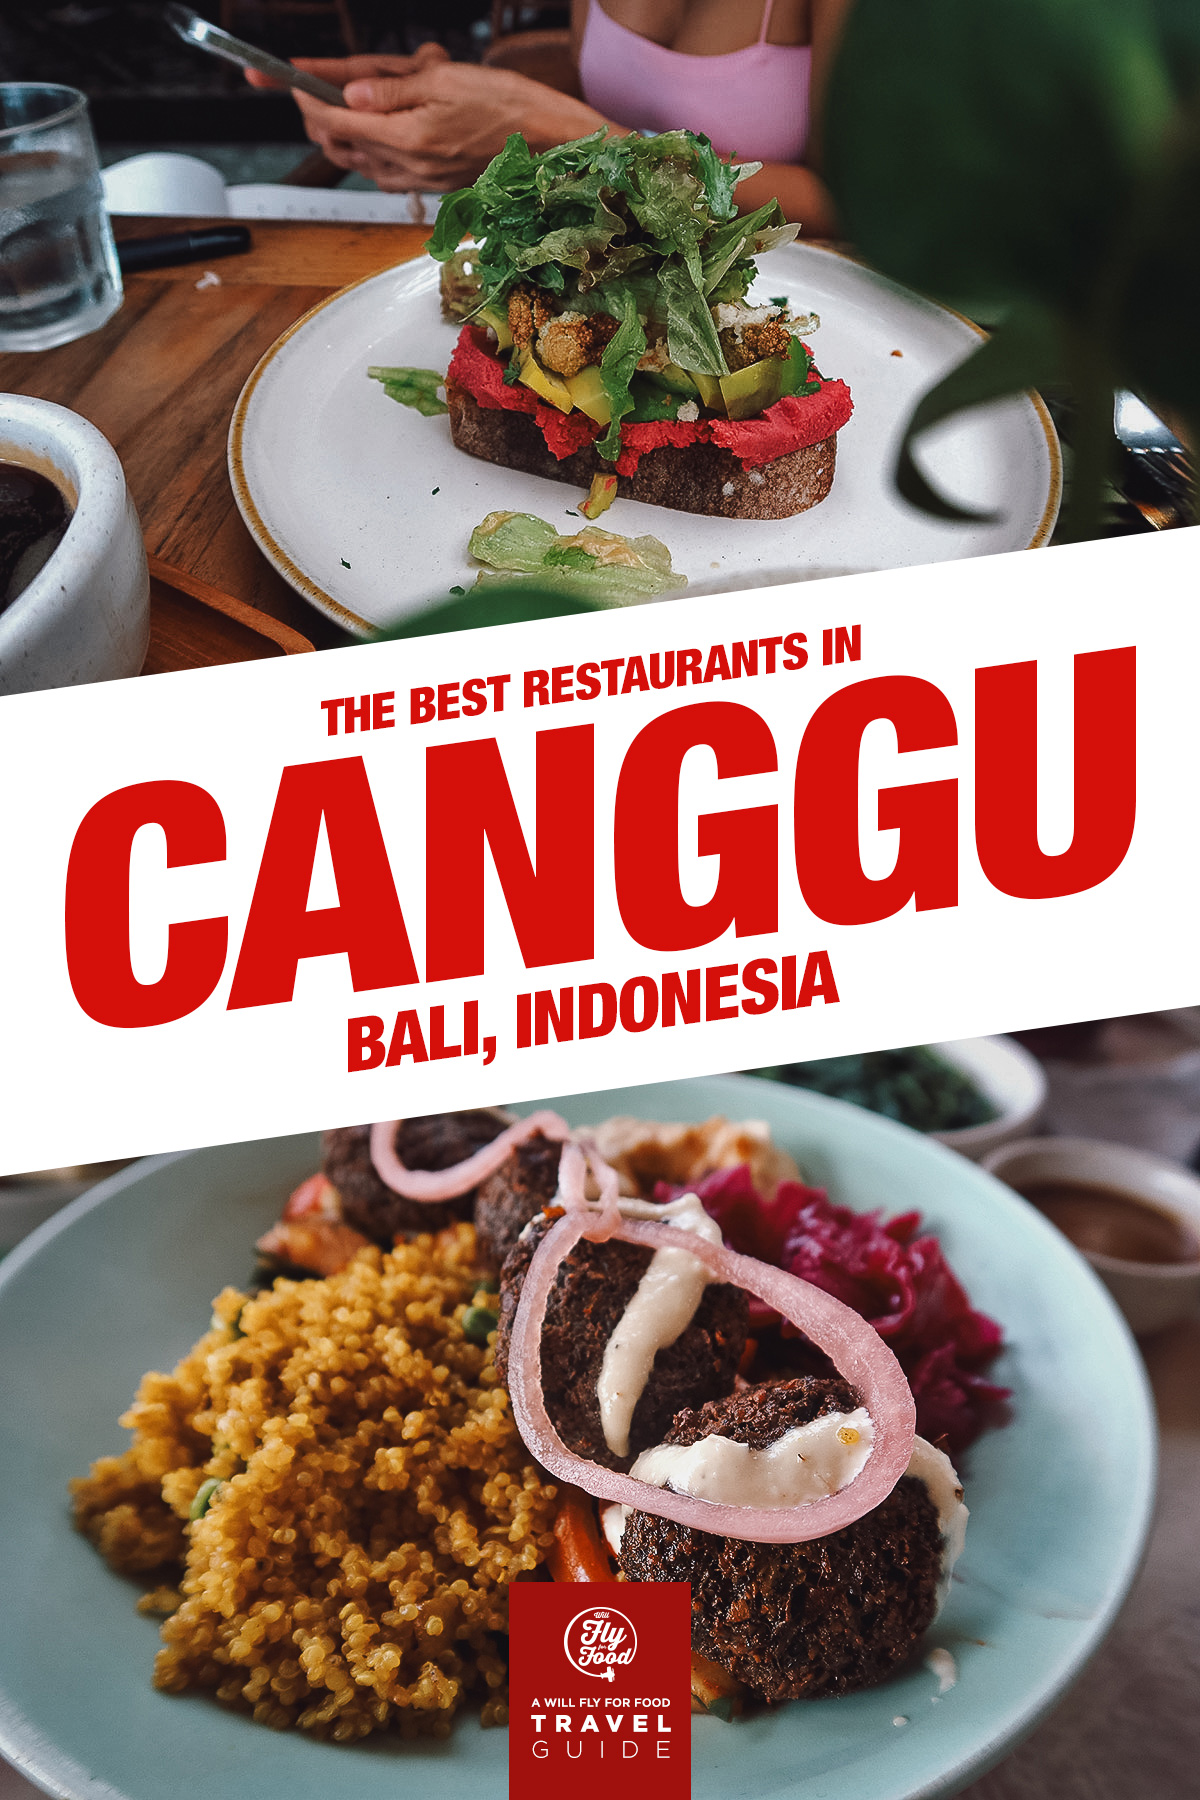 Dishes from restaurants in Canggu, Bali, Indonesia